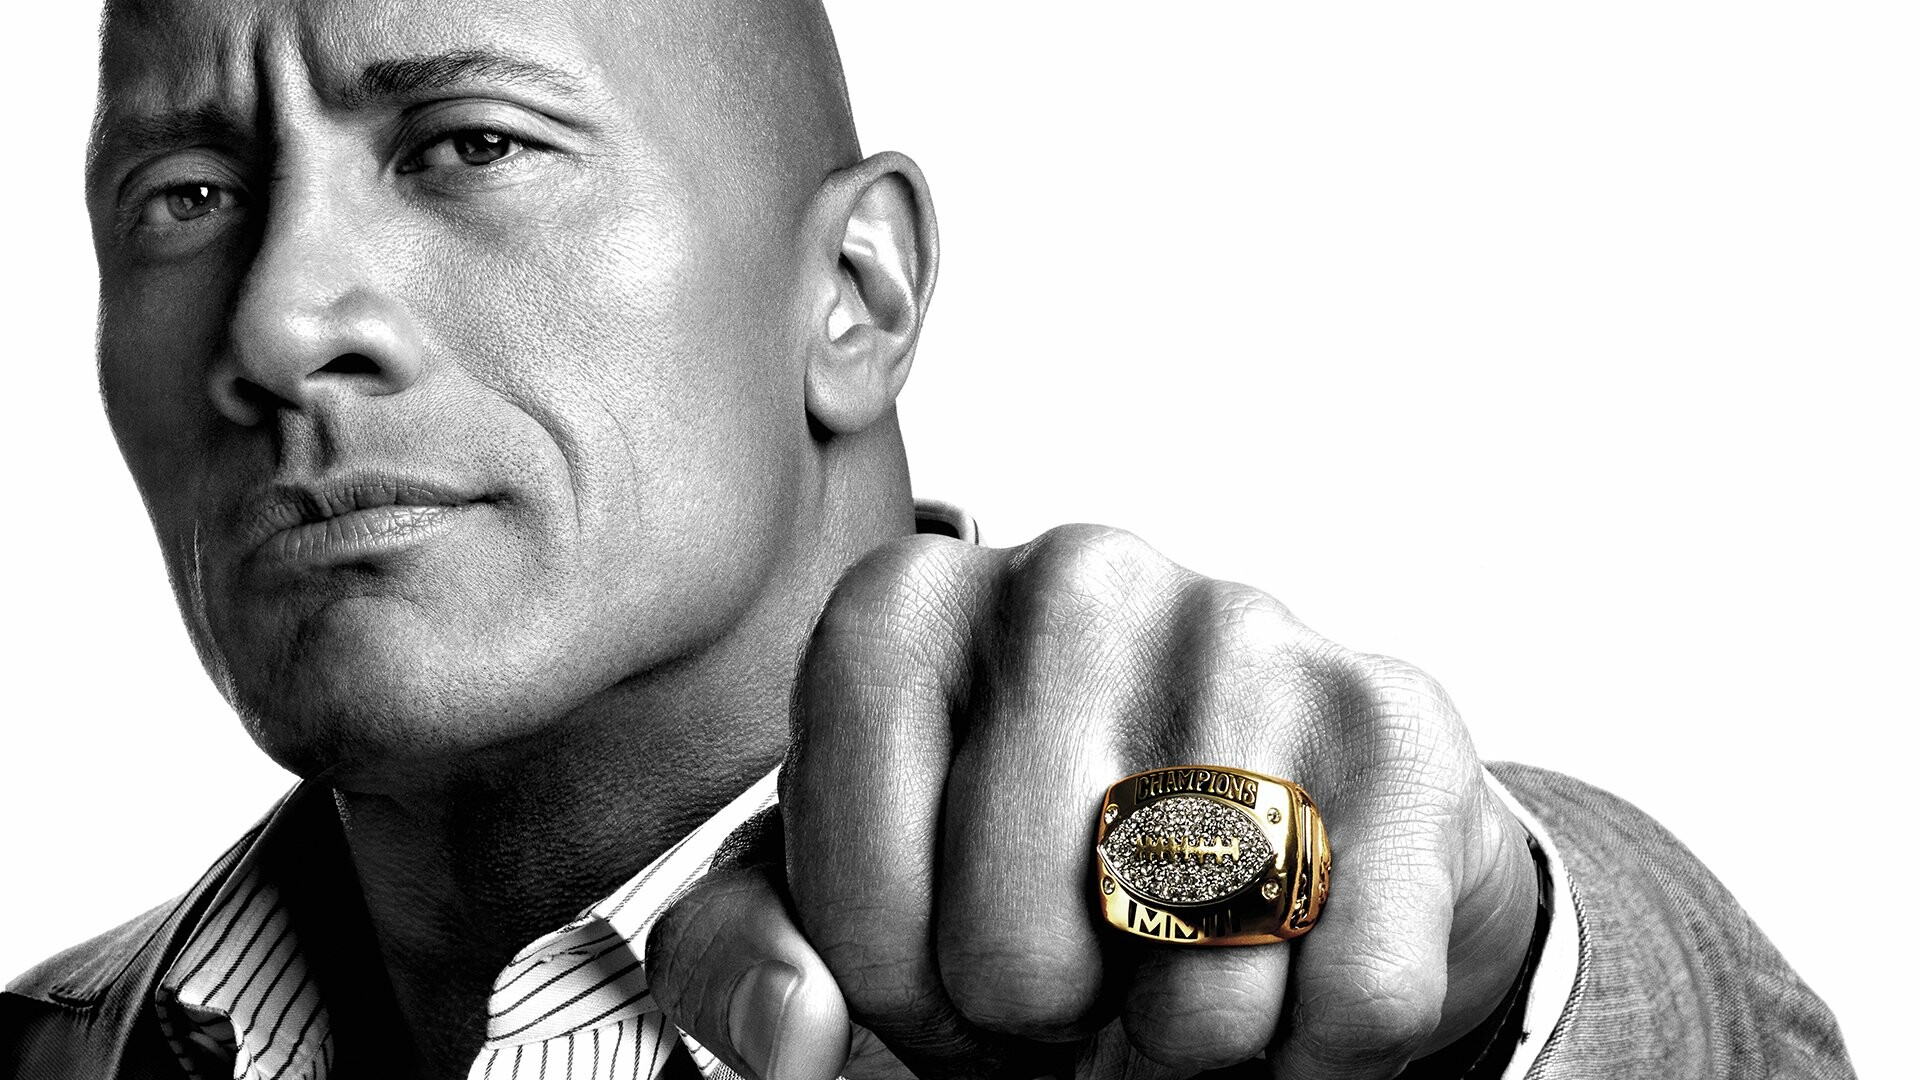 Dwayne Johnson: Starred in and executive produced HBO TV show, Ballers. 1920x1080 Full HD Wallpaper.